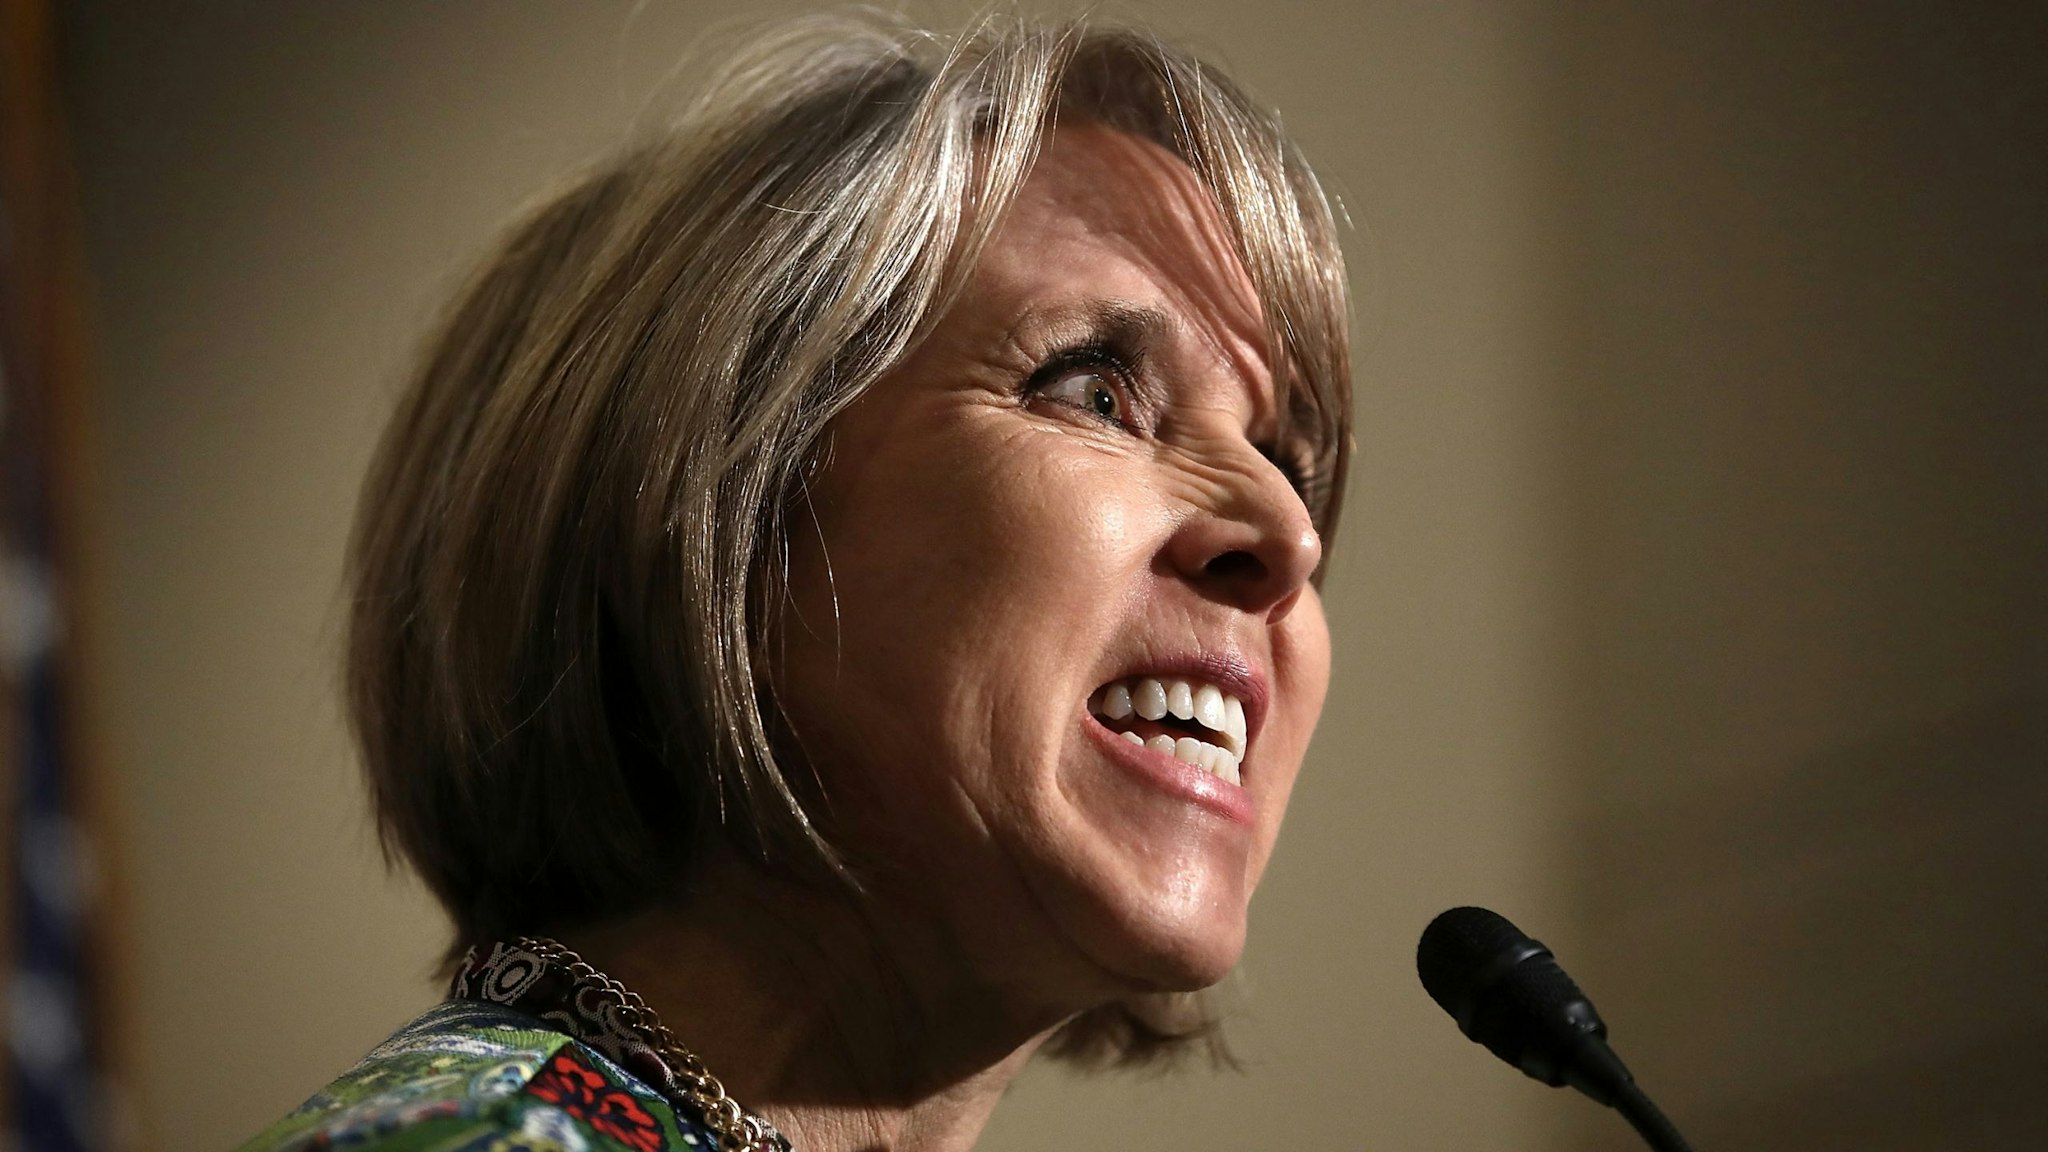 WASHINGTON, DC - MARCH 17: Rep. Michelle Lujan Grisham (D-NM), chairwoman of the Congressional Hispanic Caucus, delivers remarks following a meeting between U.S. Secretary of Homeland Security John Kelly and members of the Congressional Hispanic Caucus at the U.S. Capitol March 17, 2017 in Washington, DC. Kelly met with the group to answer questions on U.S. President Donald Trump's recent executive order limiting immigration to the U.S. as well as other topics.